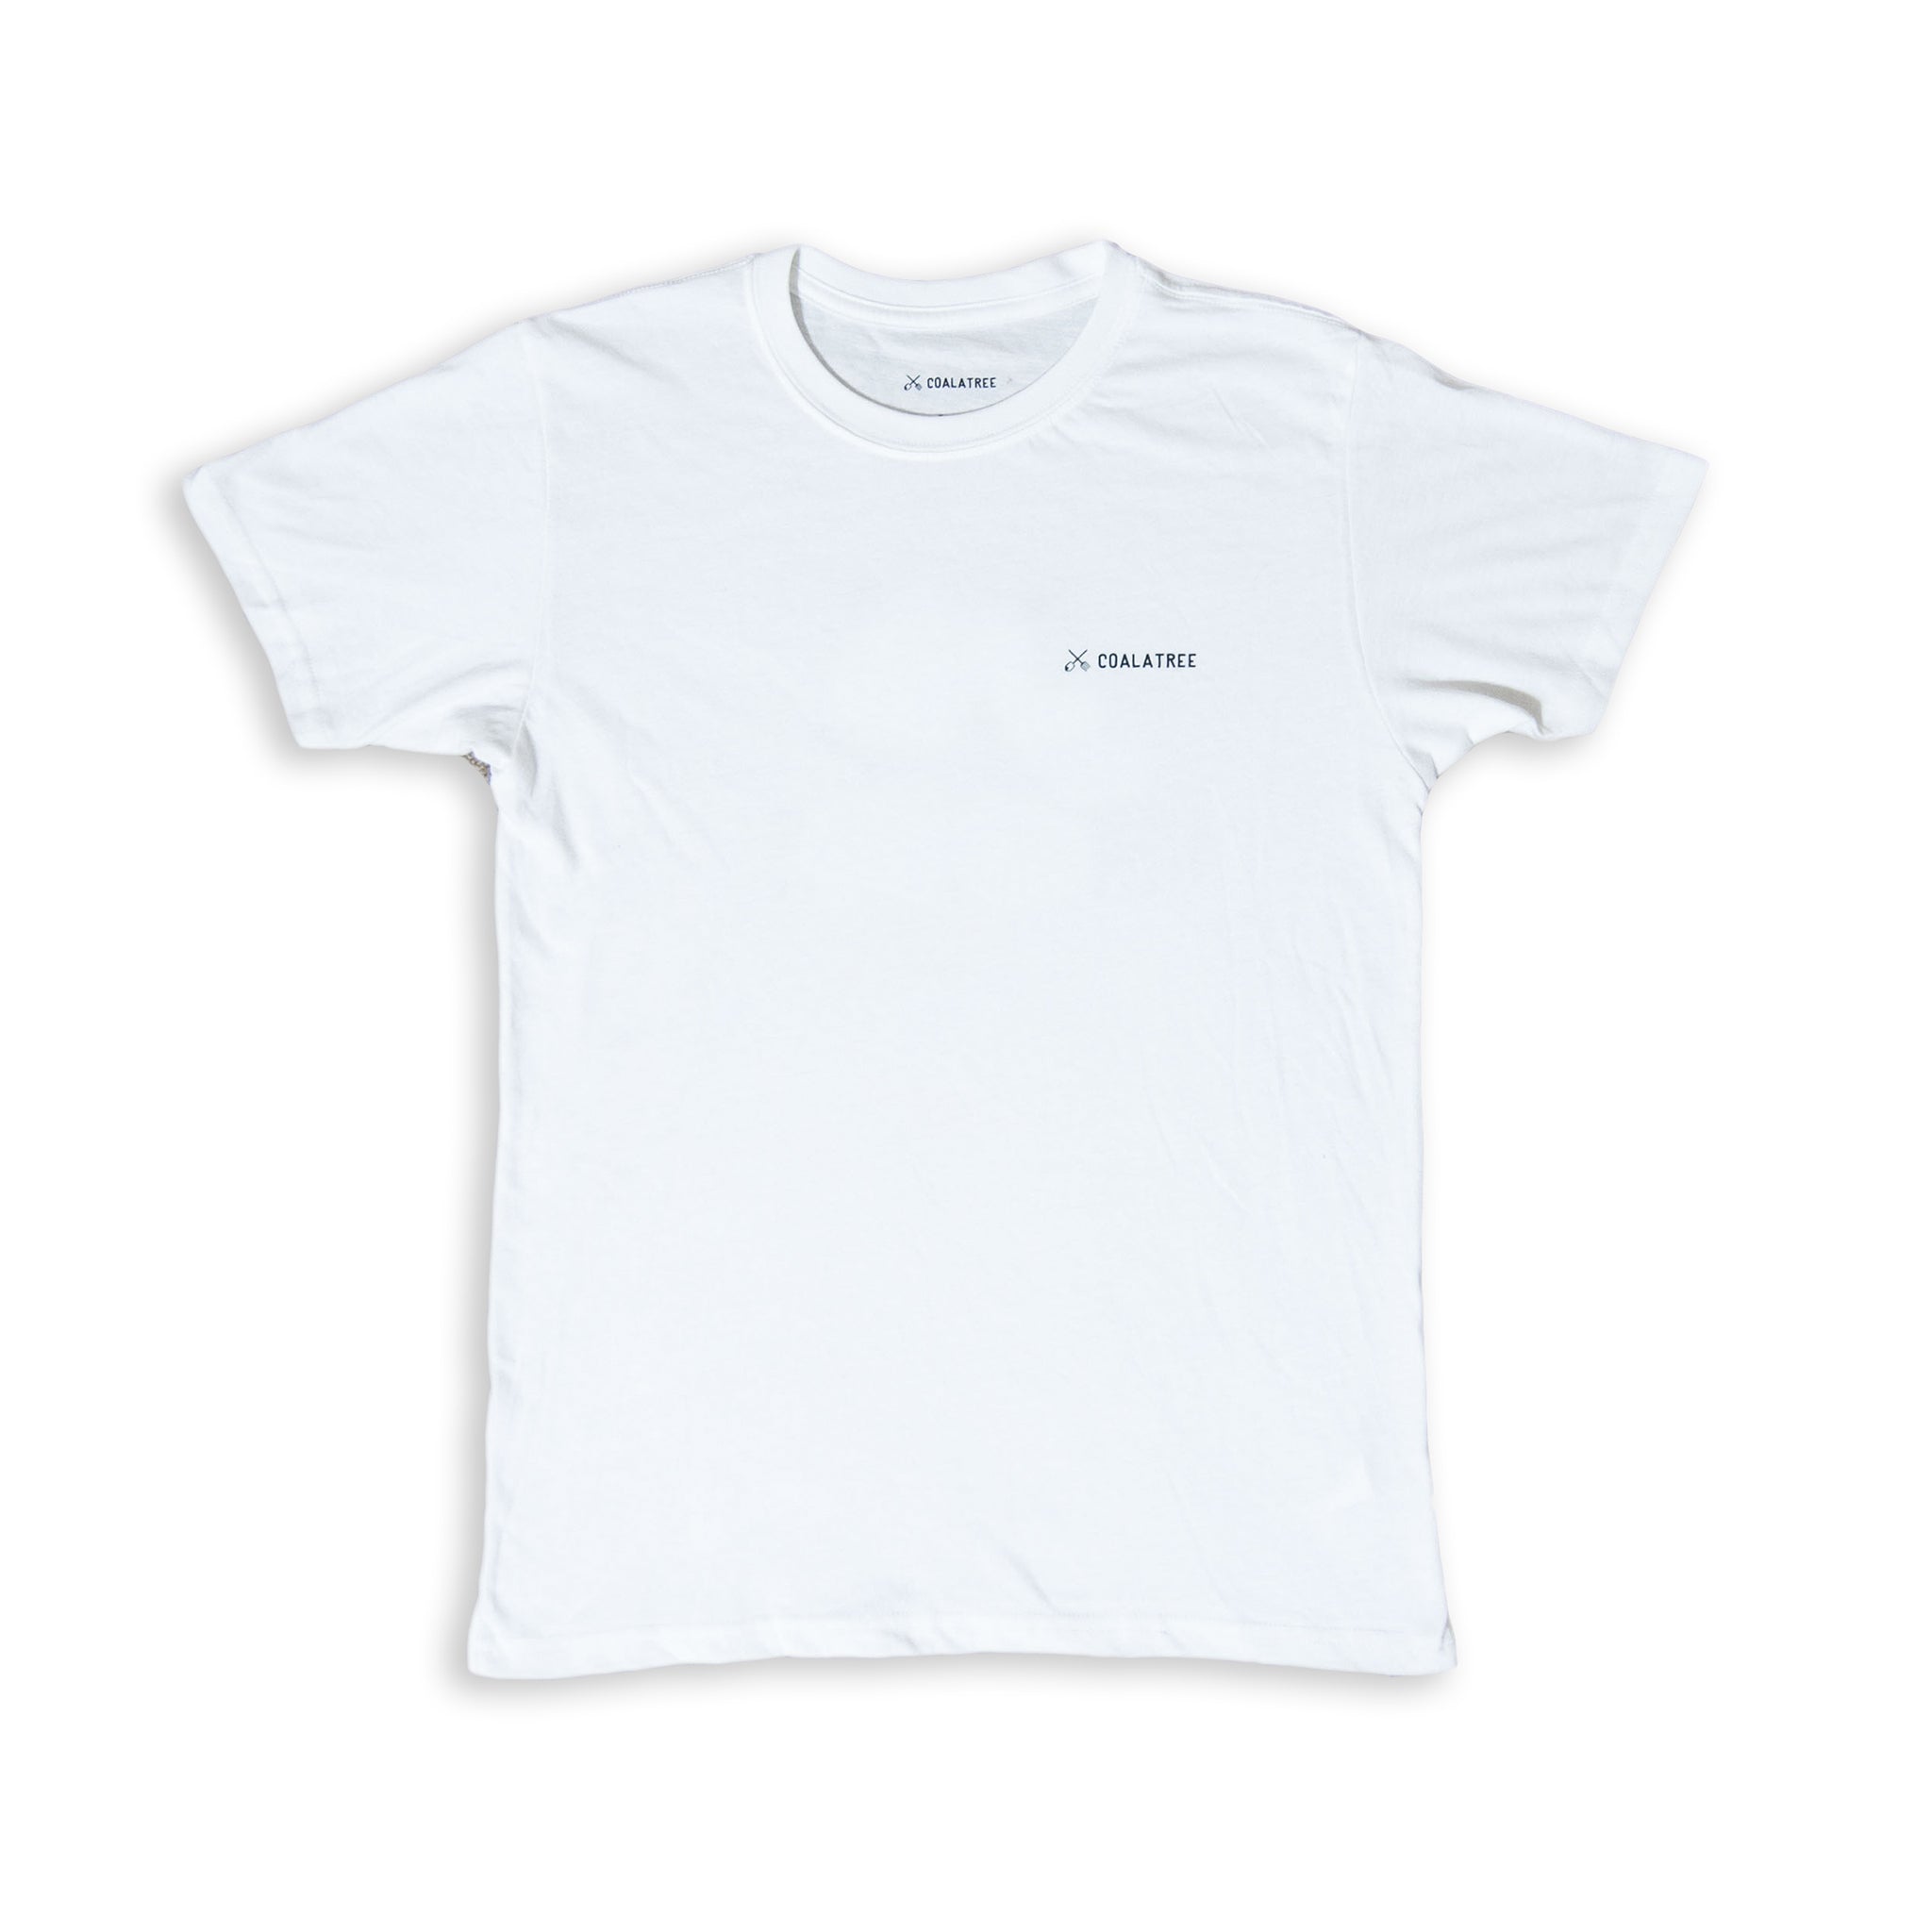 PITCHFORK TEE: Discover the Latest Additions to Our Tee Collection